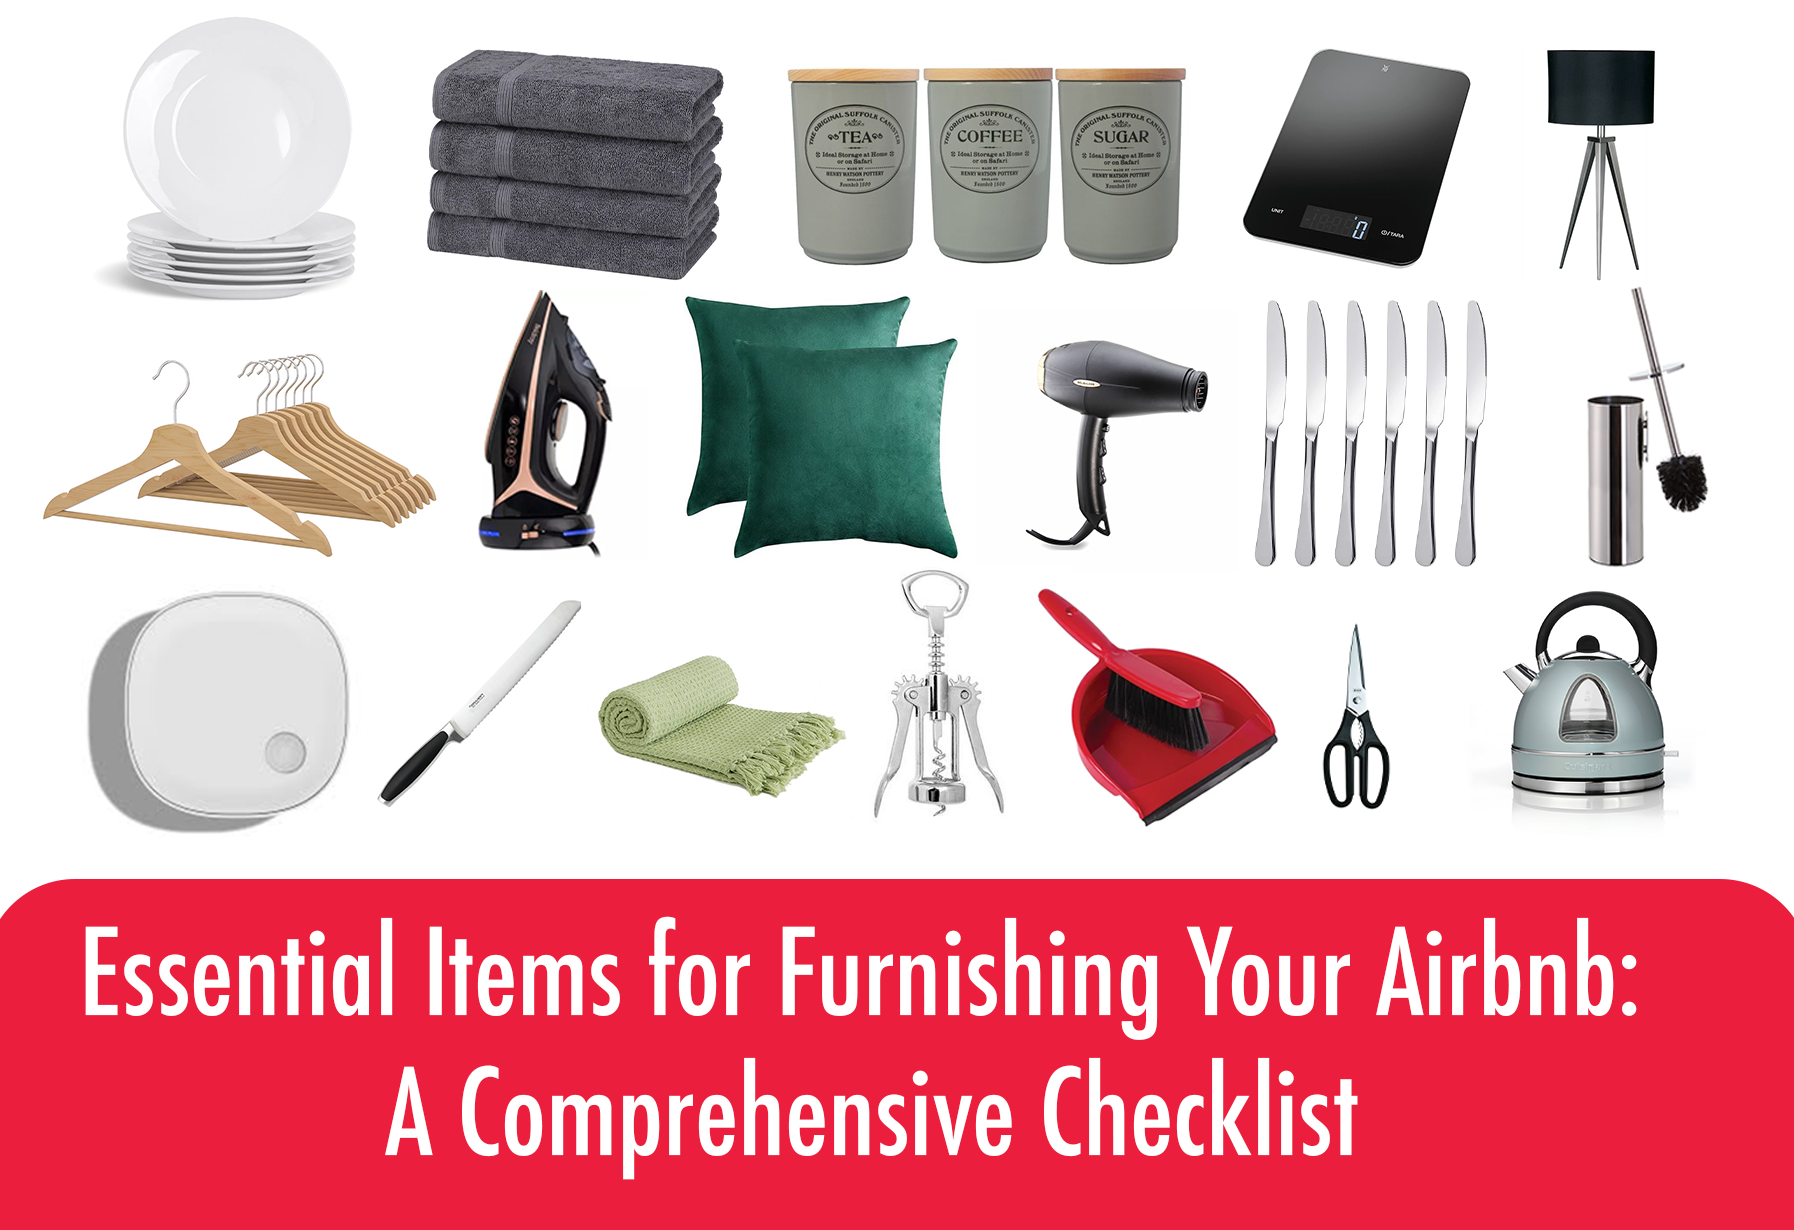 Essential Items for Furnishing Your Airbnb: A Comprehensive Checklist